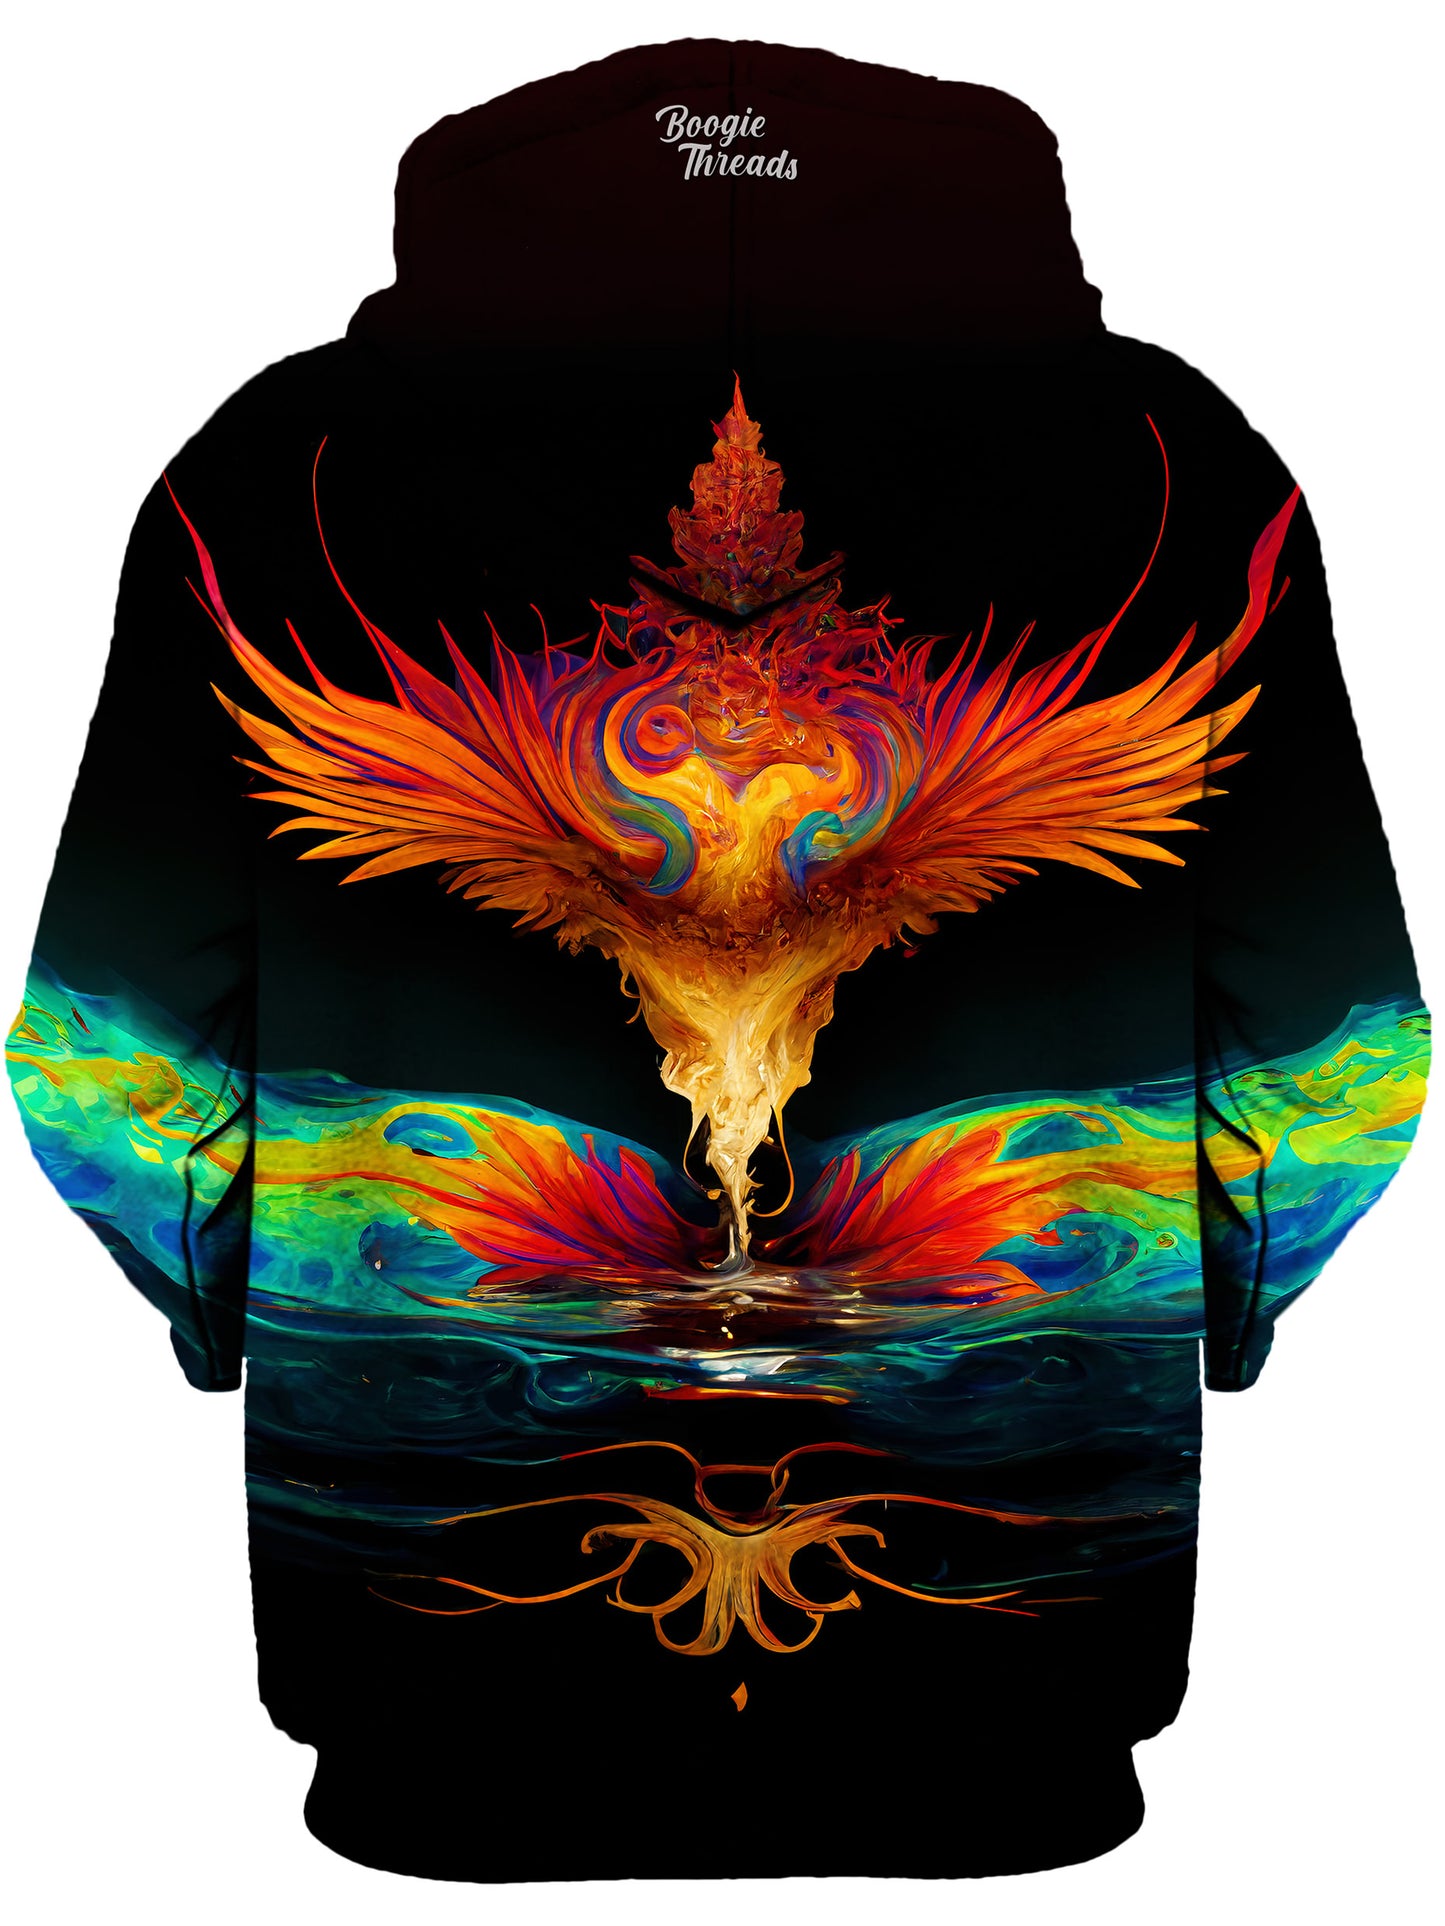 Guilty Jewels Unisex Zip-Up Hoodie, Gratefully Dyed, | iEDM